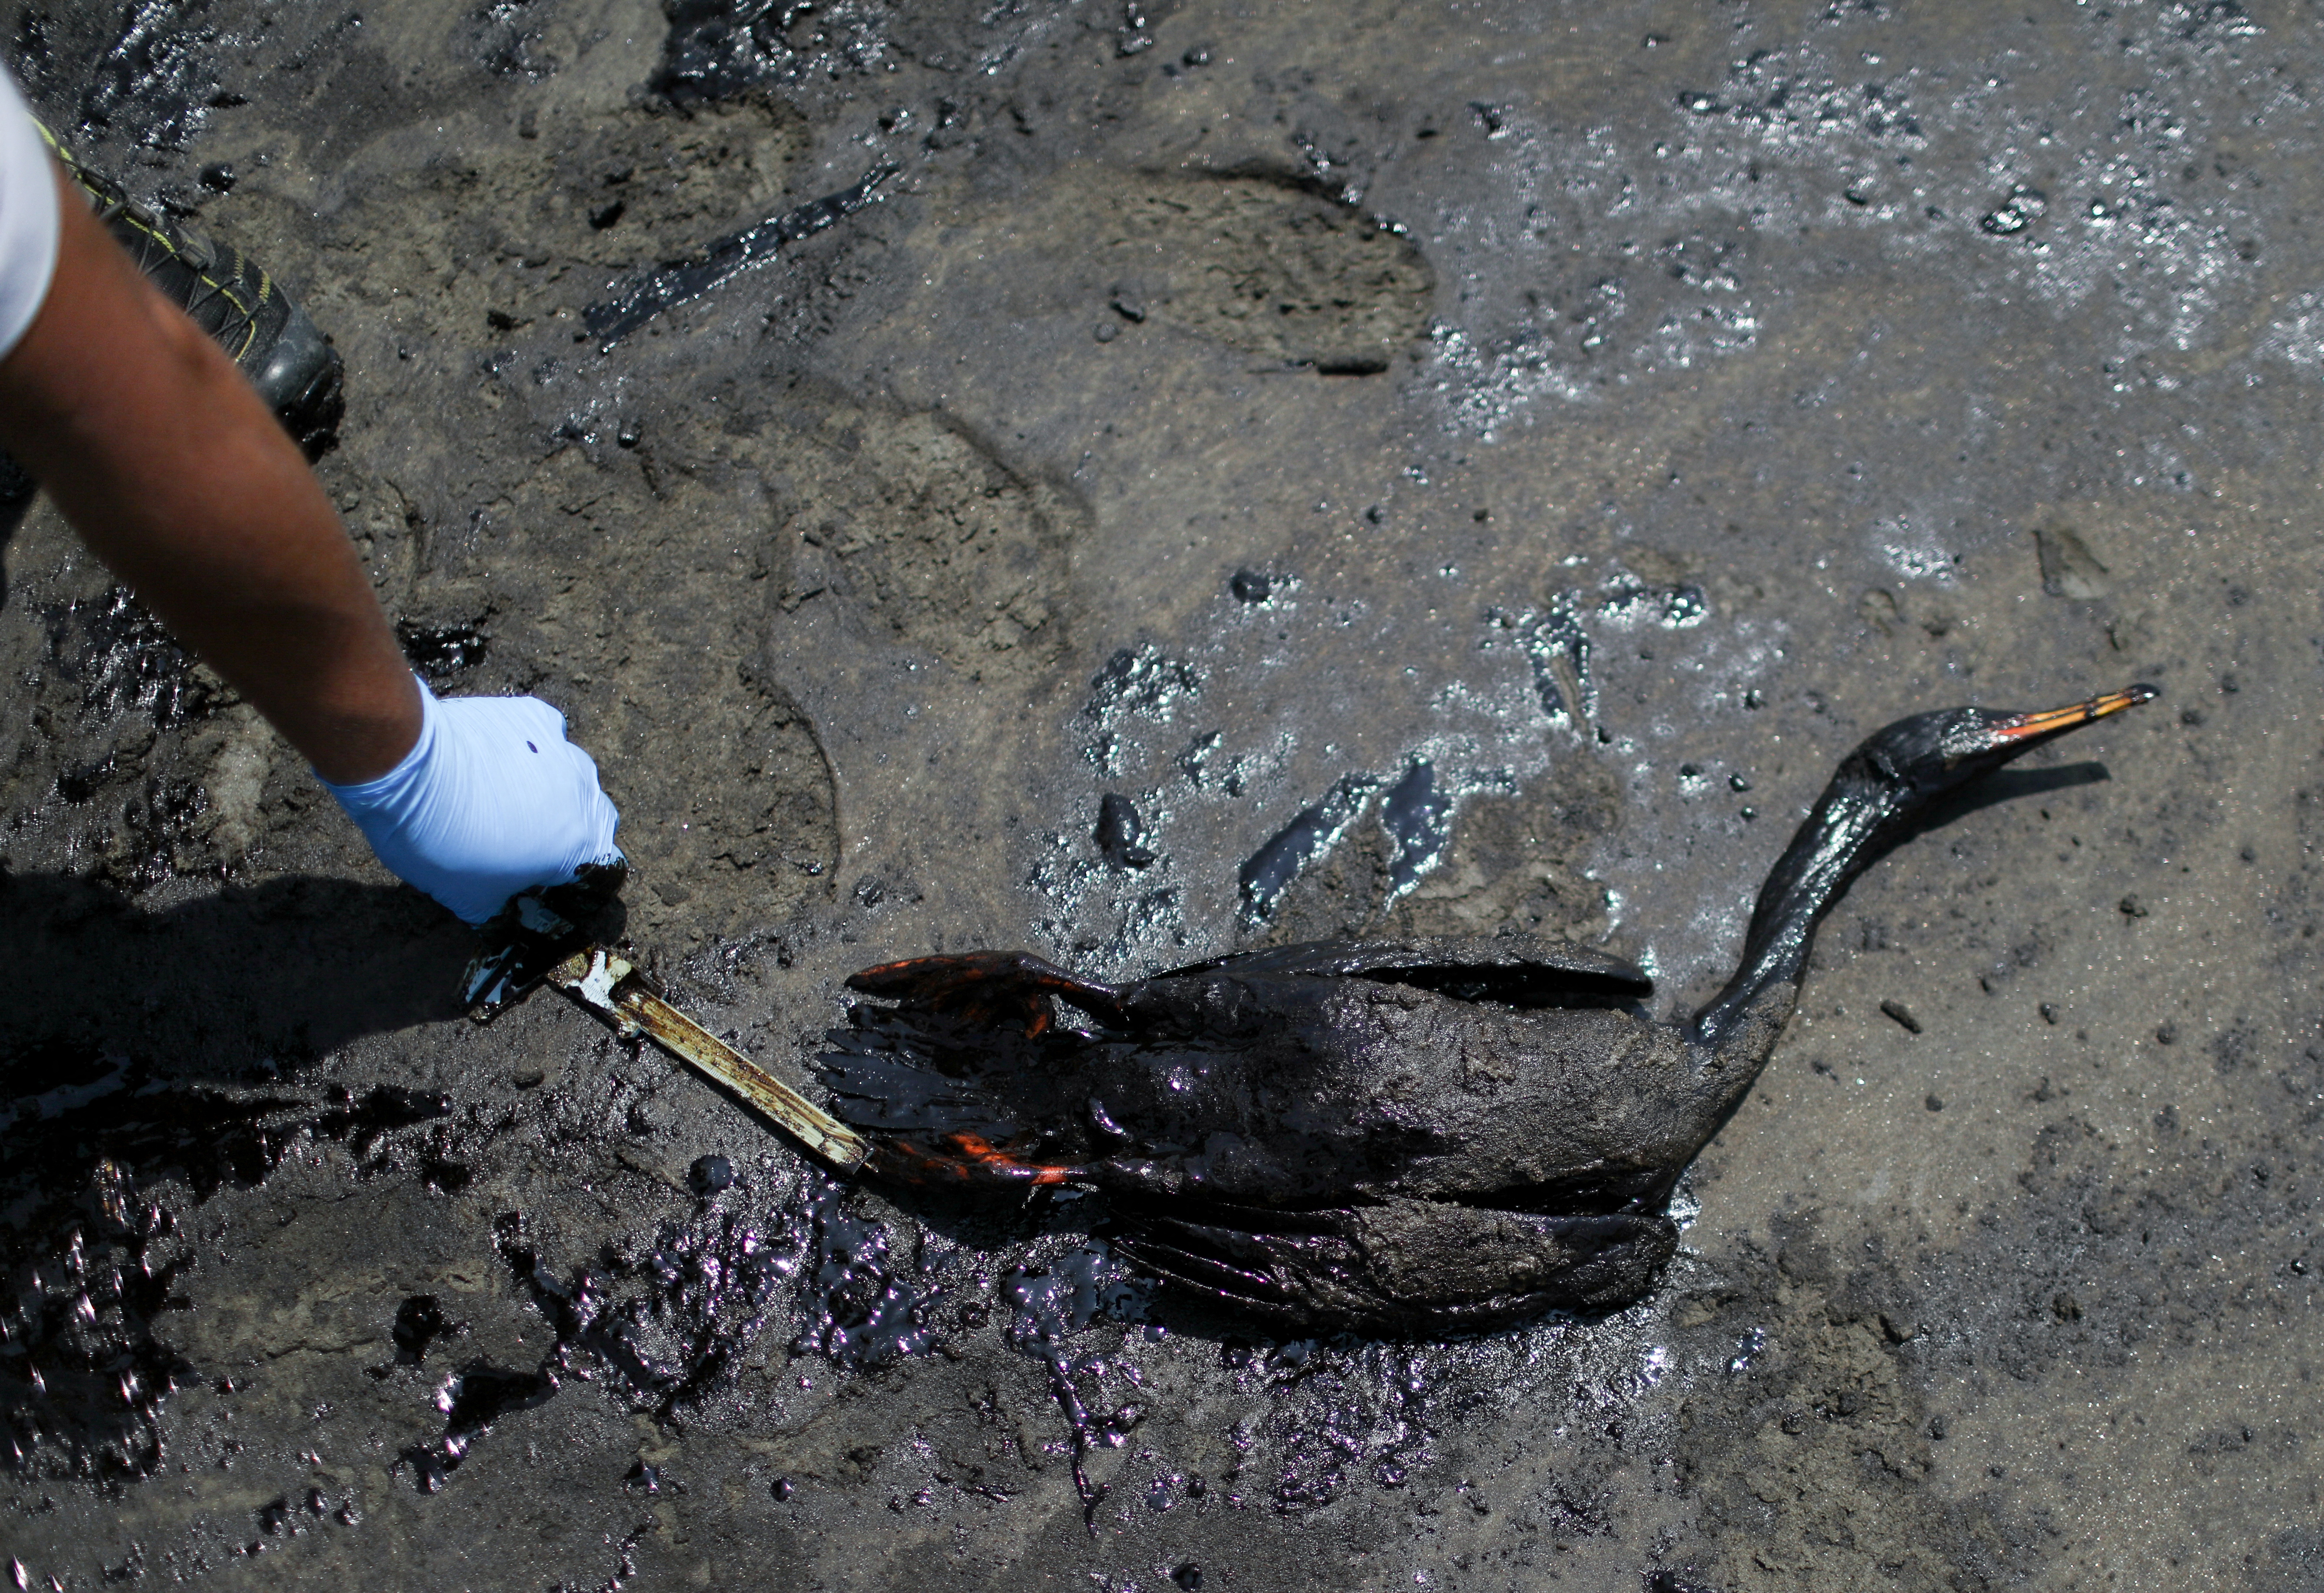 Workers clean up an oil spill in Ventanilla